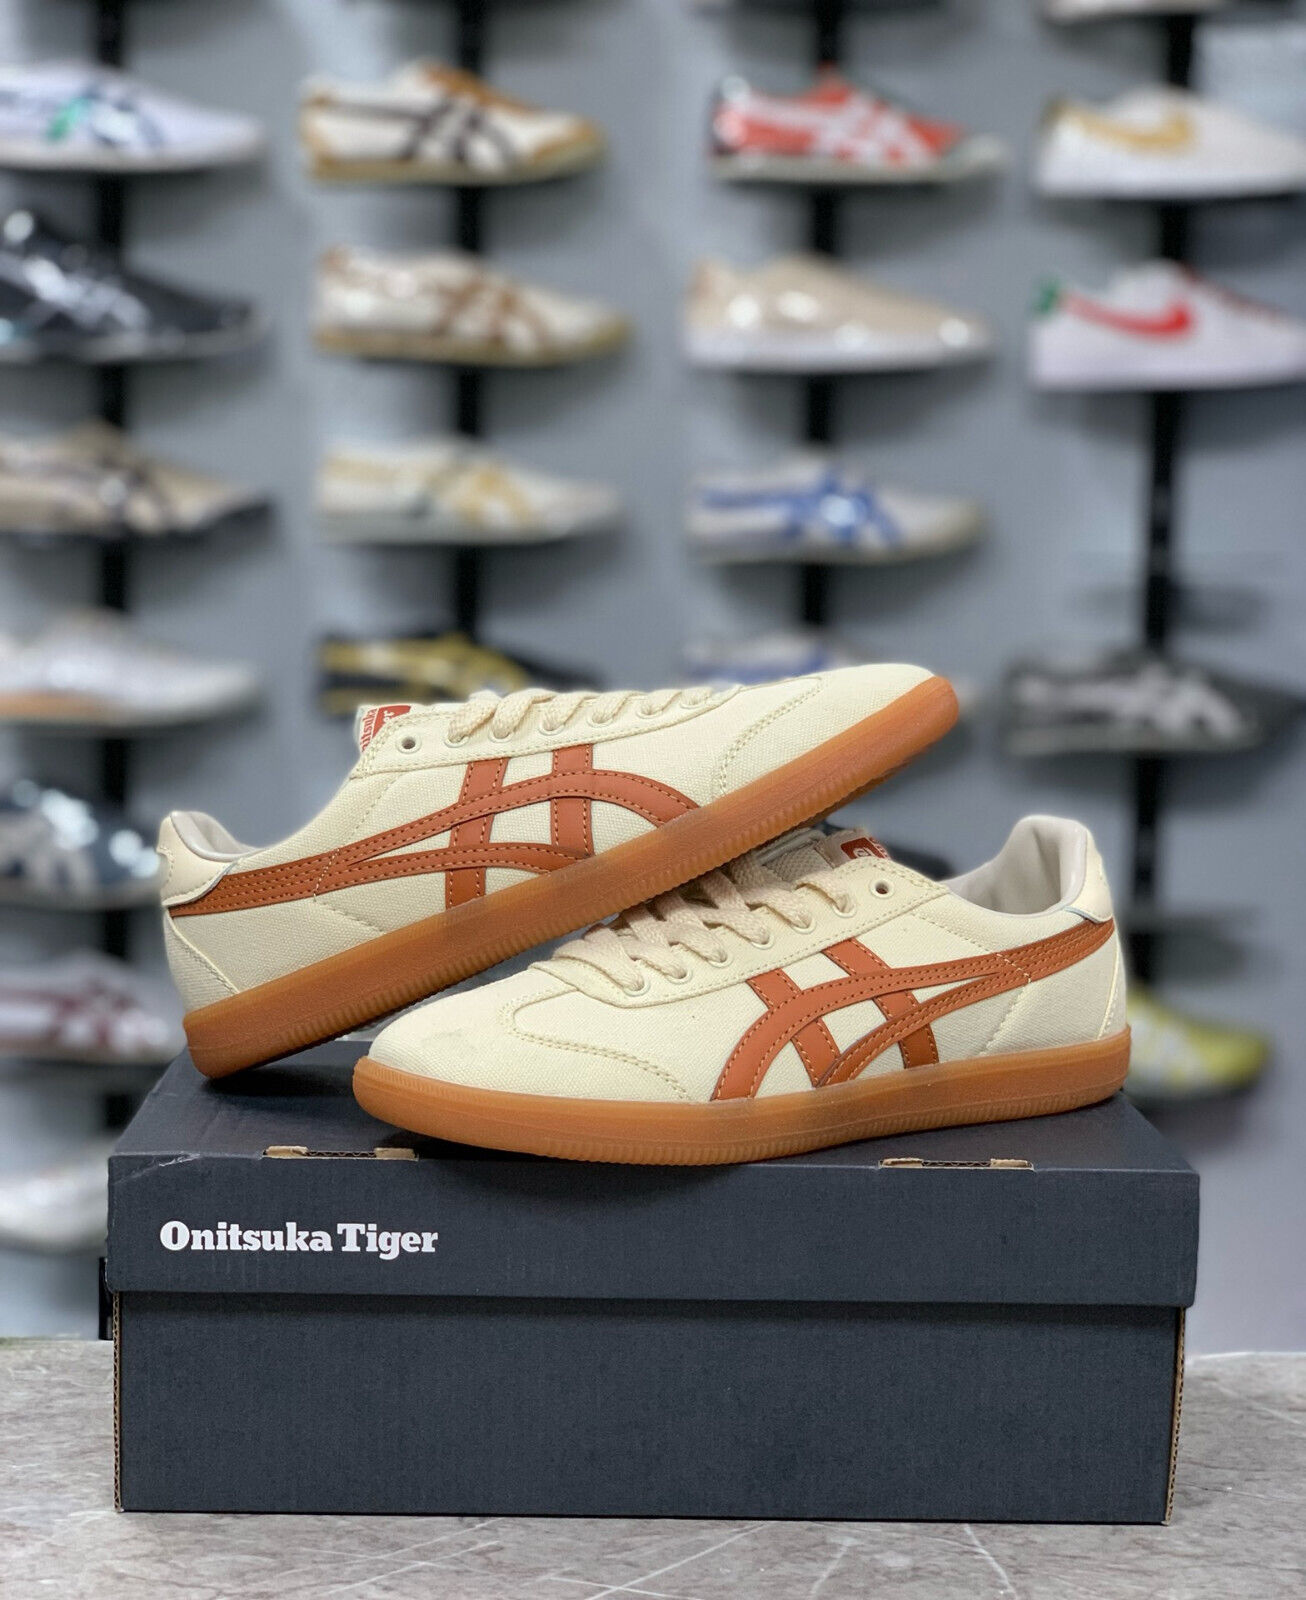 [NEW]Onitsuka Tiger Tokuten Classic Vintage Cream/Caramel Shoes Sports Shoes hot